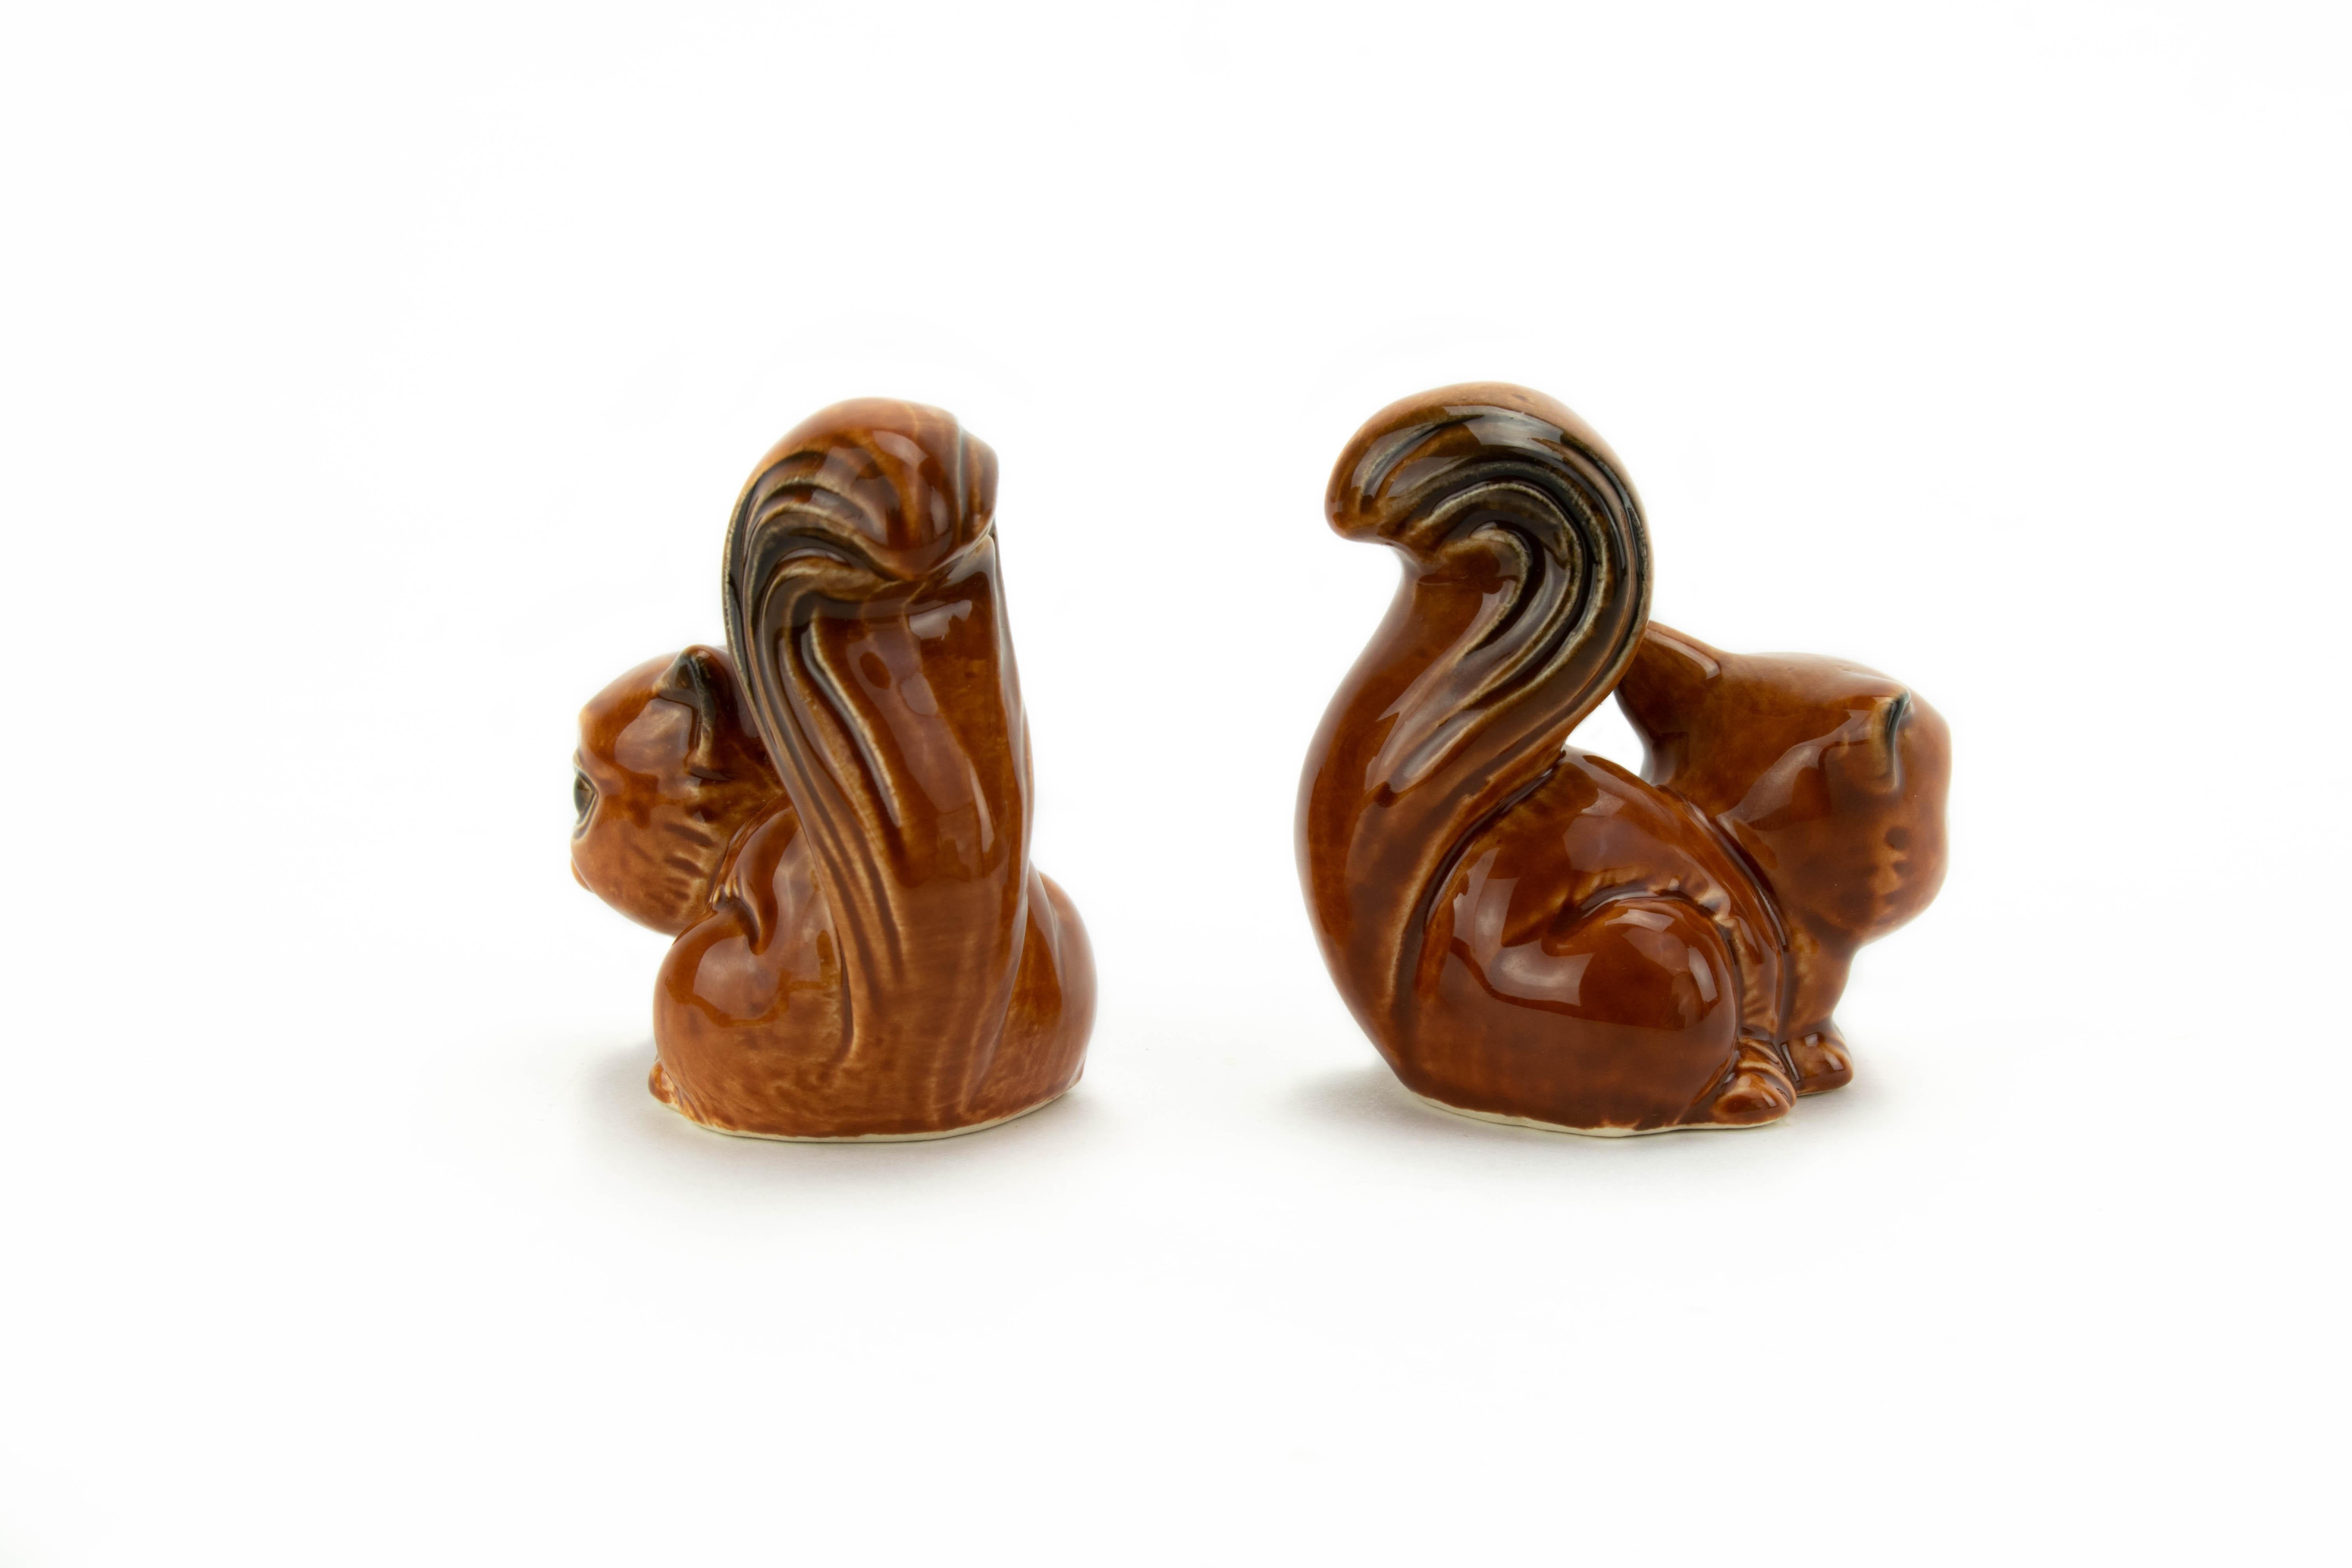 Late 20th Century Midcentury Porcelain Squirrels Figures from Goebel, Germany, 1970